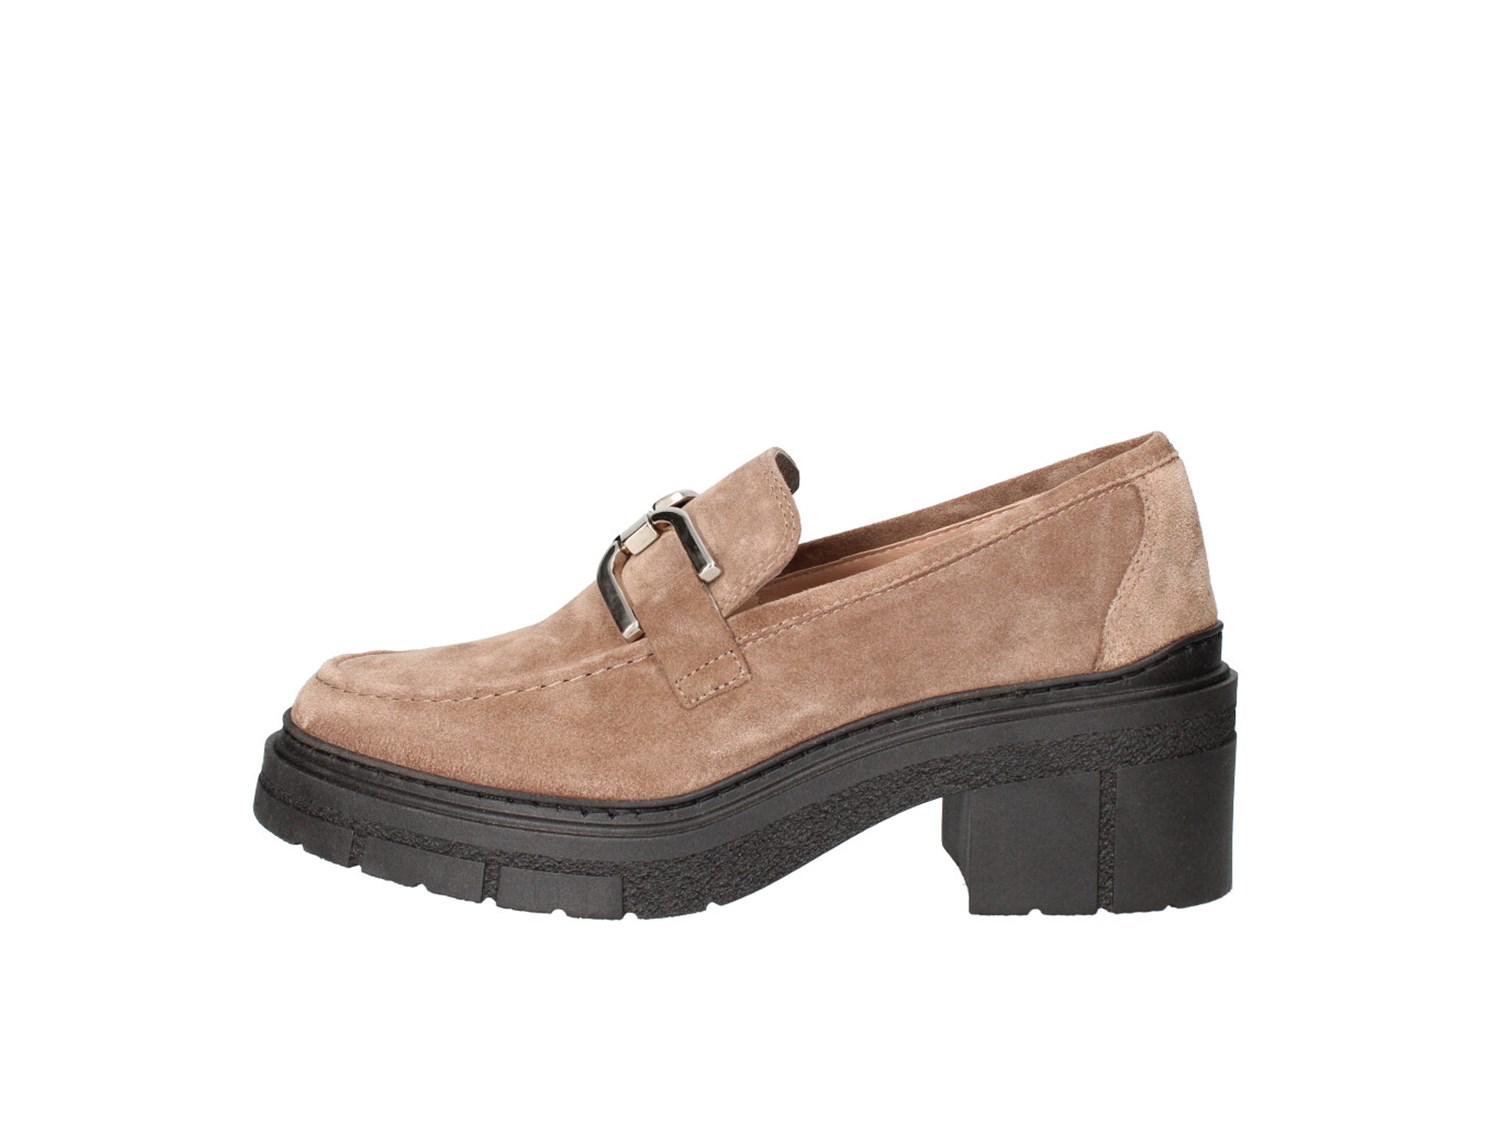 Unisa Jeffer Taupe Shoes Women Moccasin